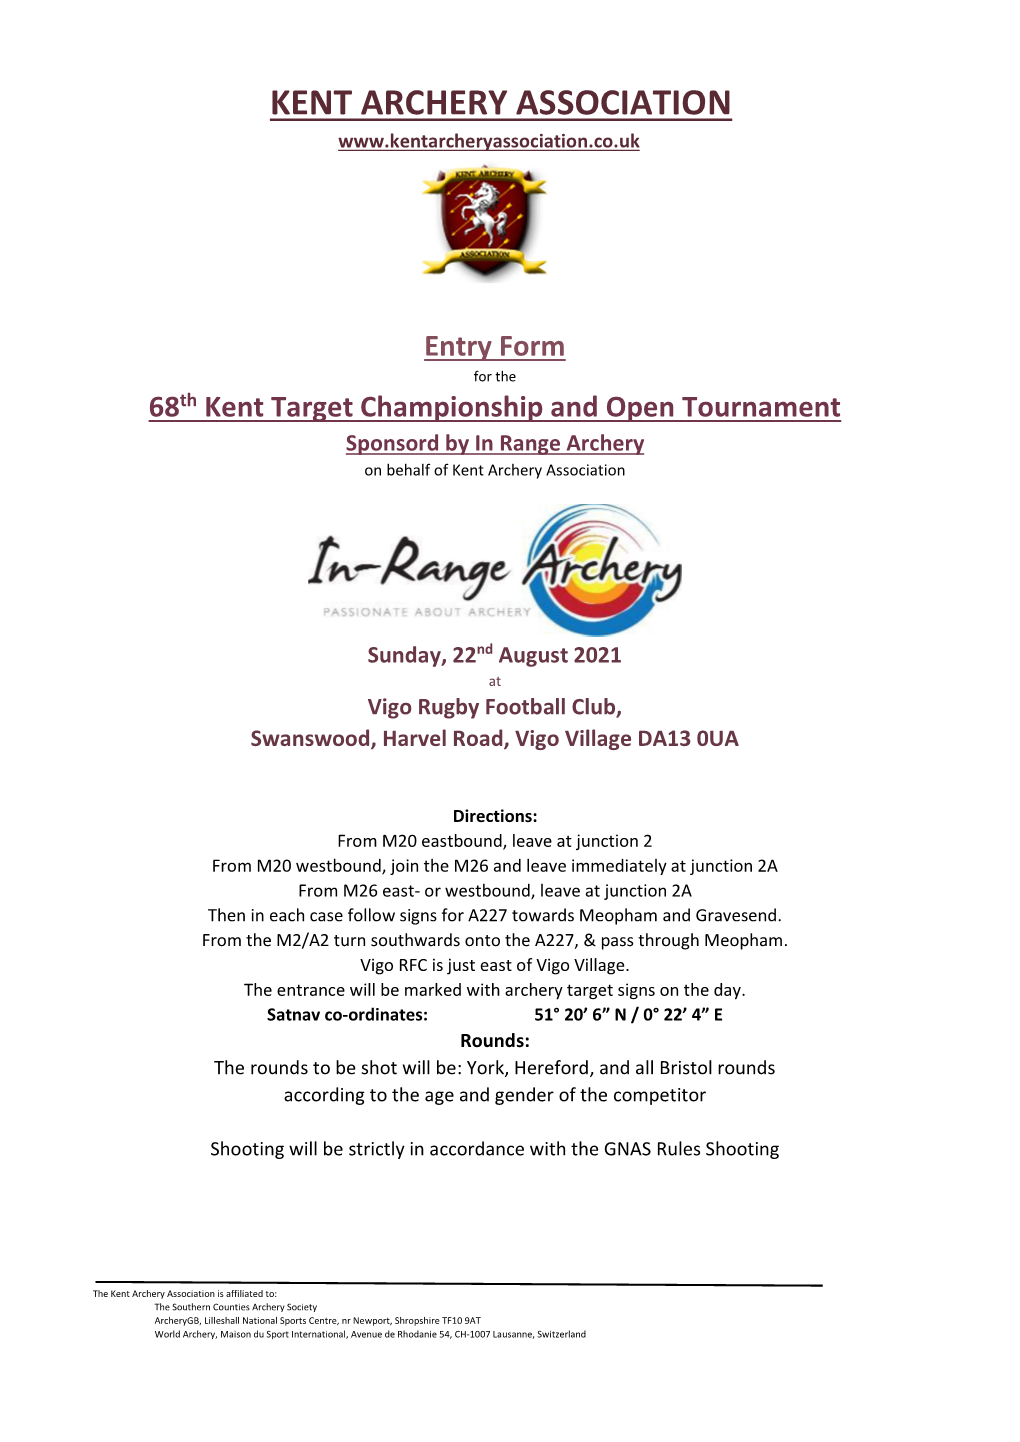 Entry Form for the 68Th Kent Target Championship and Open Tournament Sponsord by in Range Archery on Behalf of Kent Archery Association